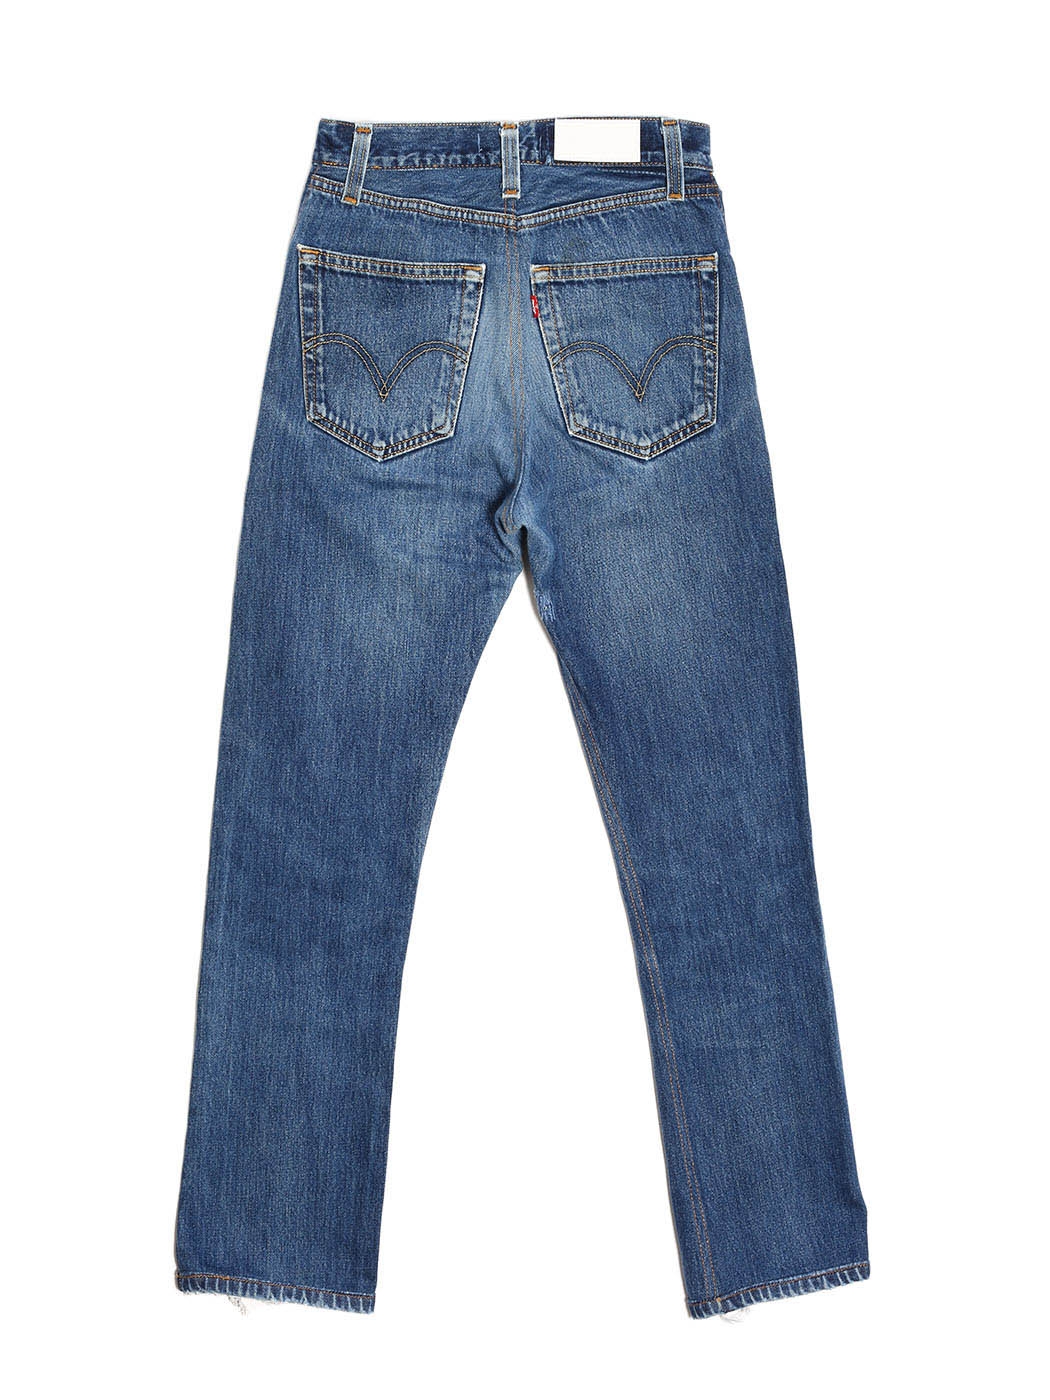 Boutique RE/DONE LEVIS HIGH RISE Self corps dark blue jeans Retail price € 205 Size 25